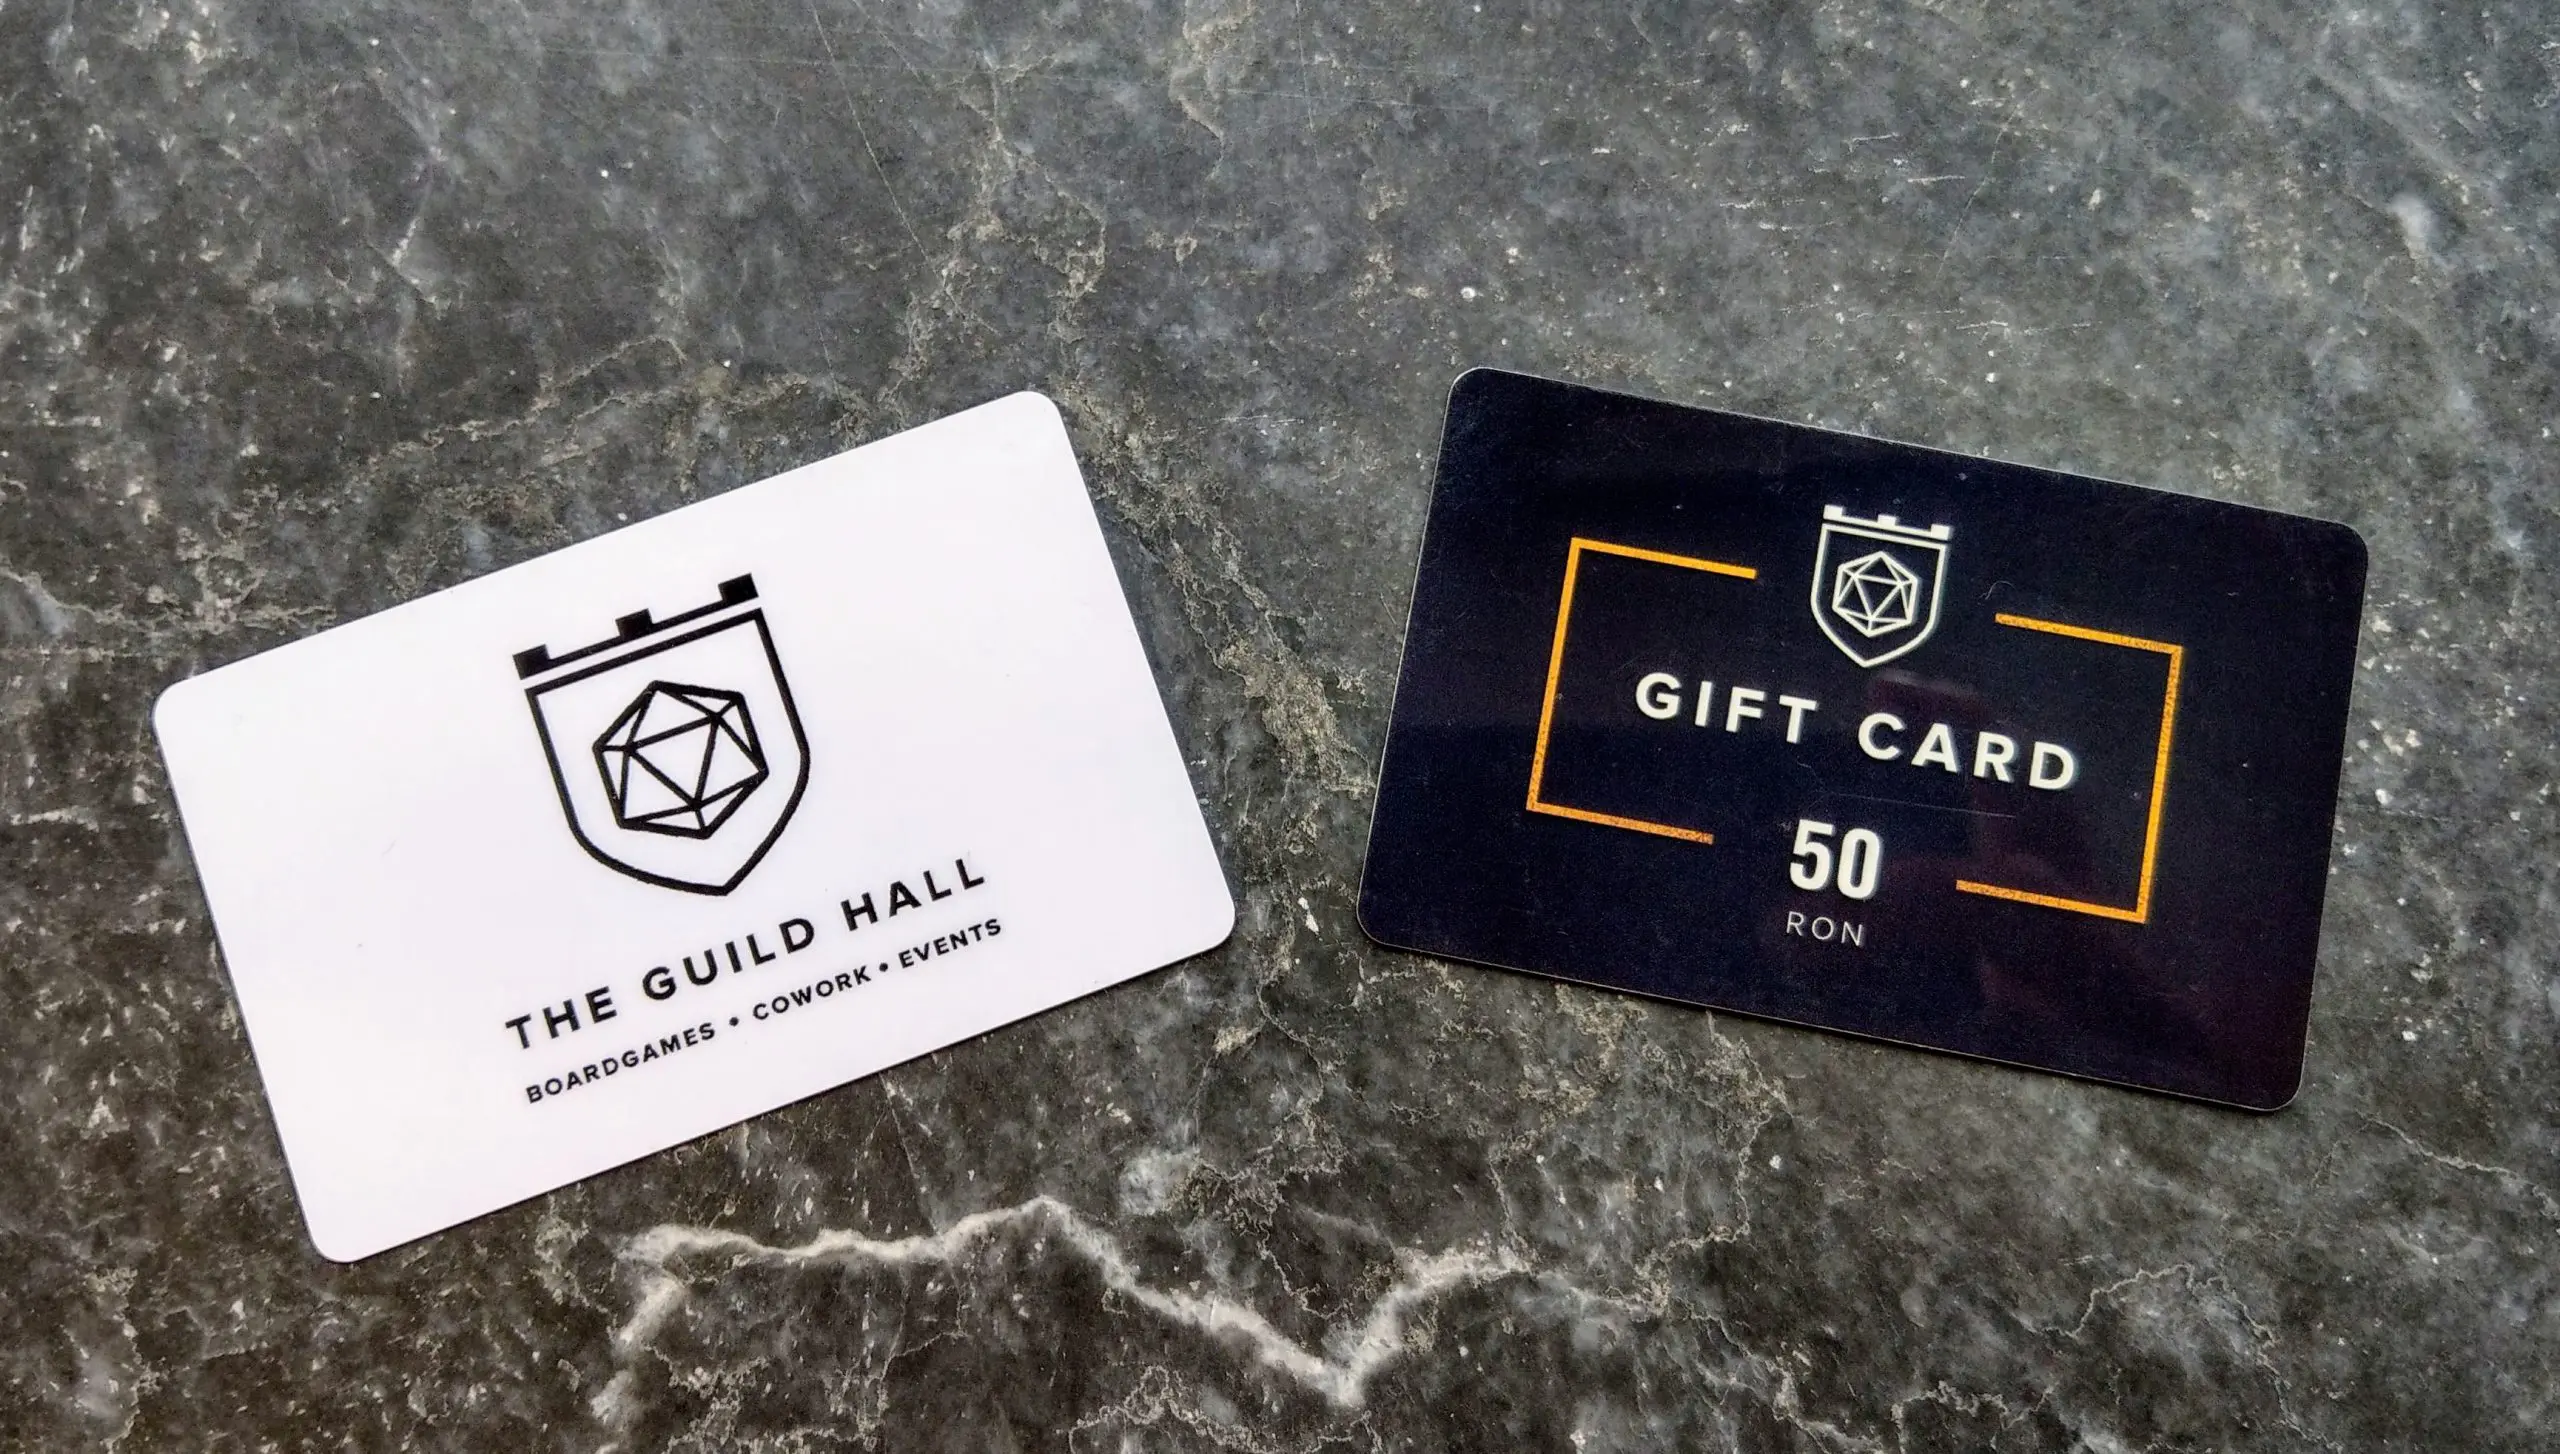 Gift Cards The Guild Hall